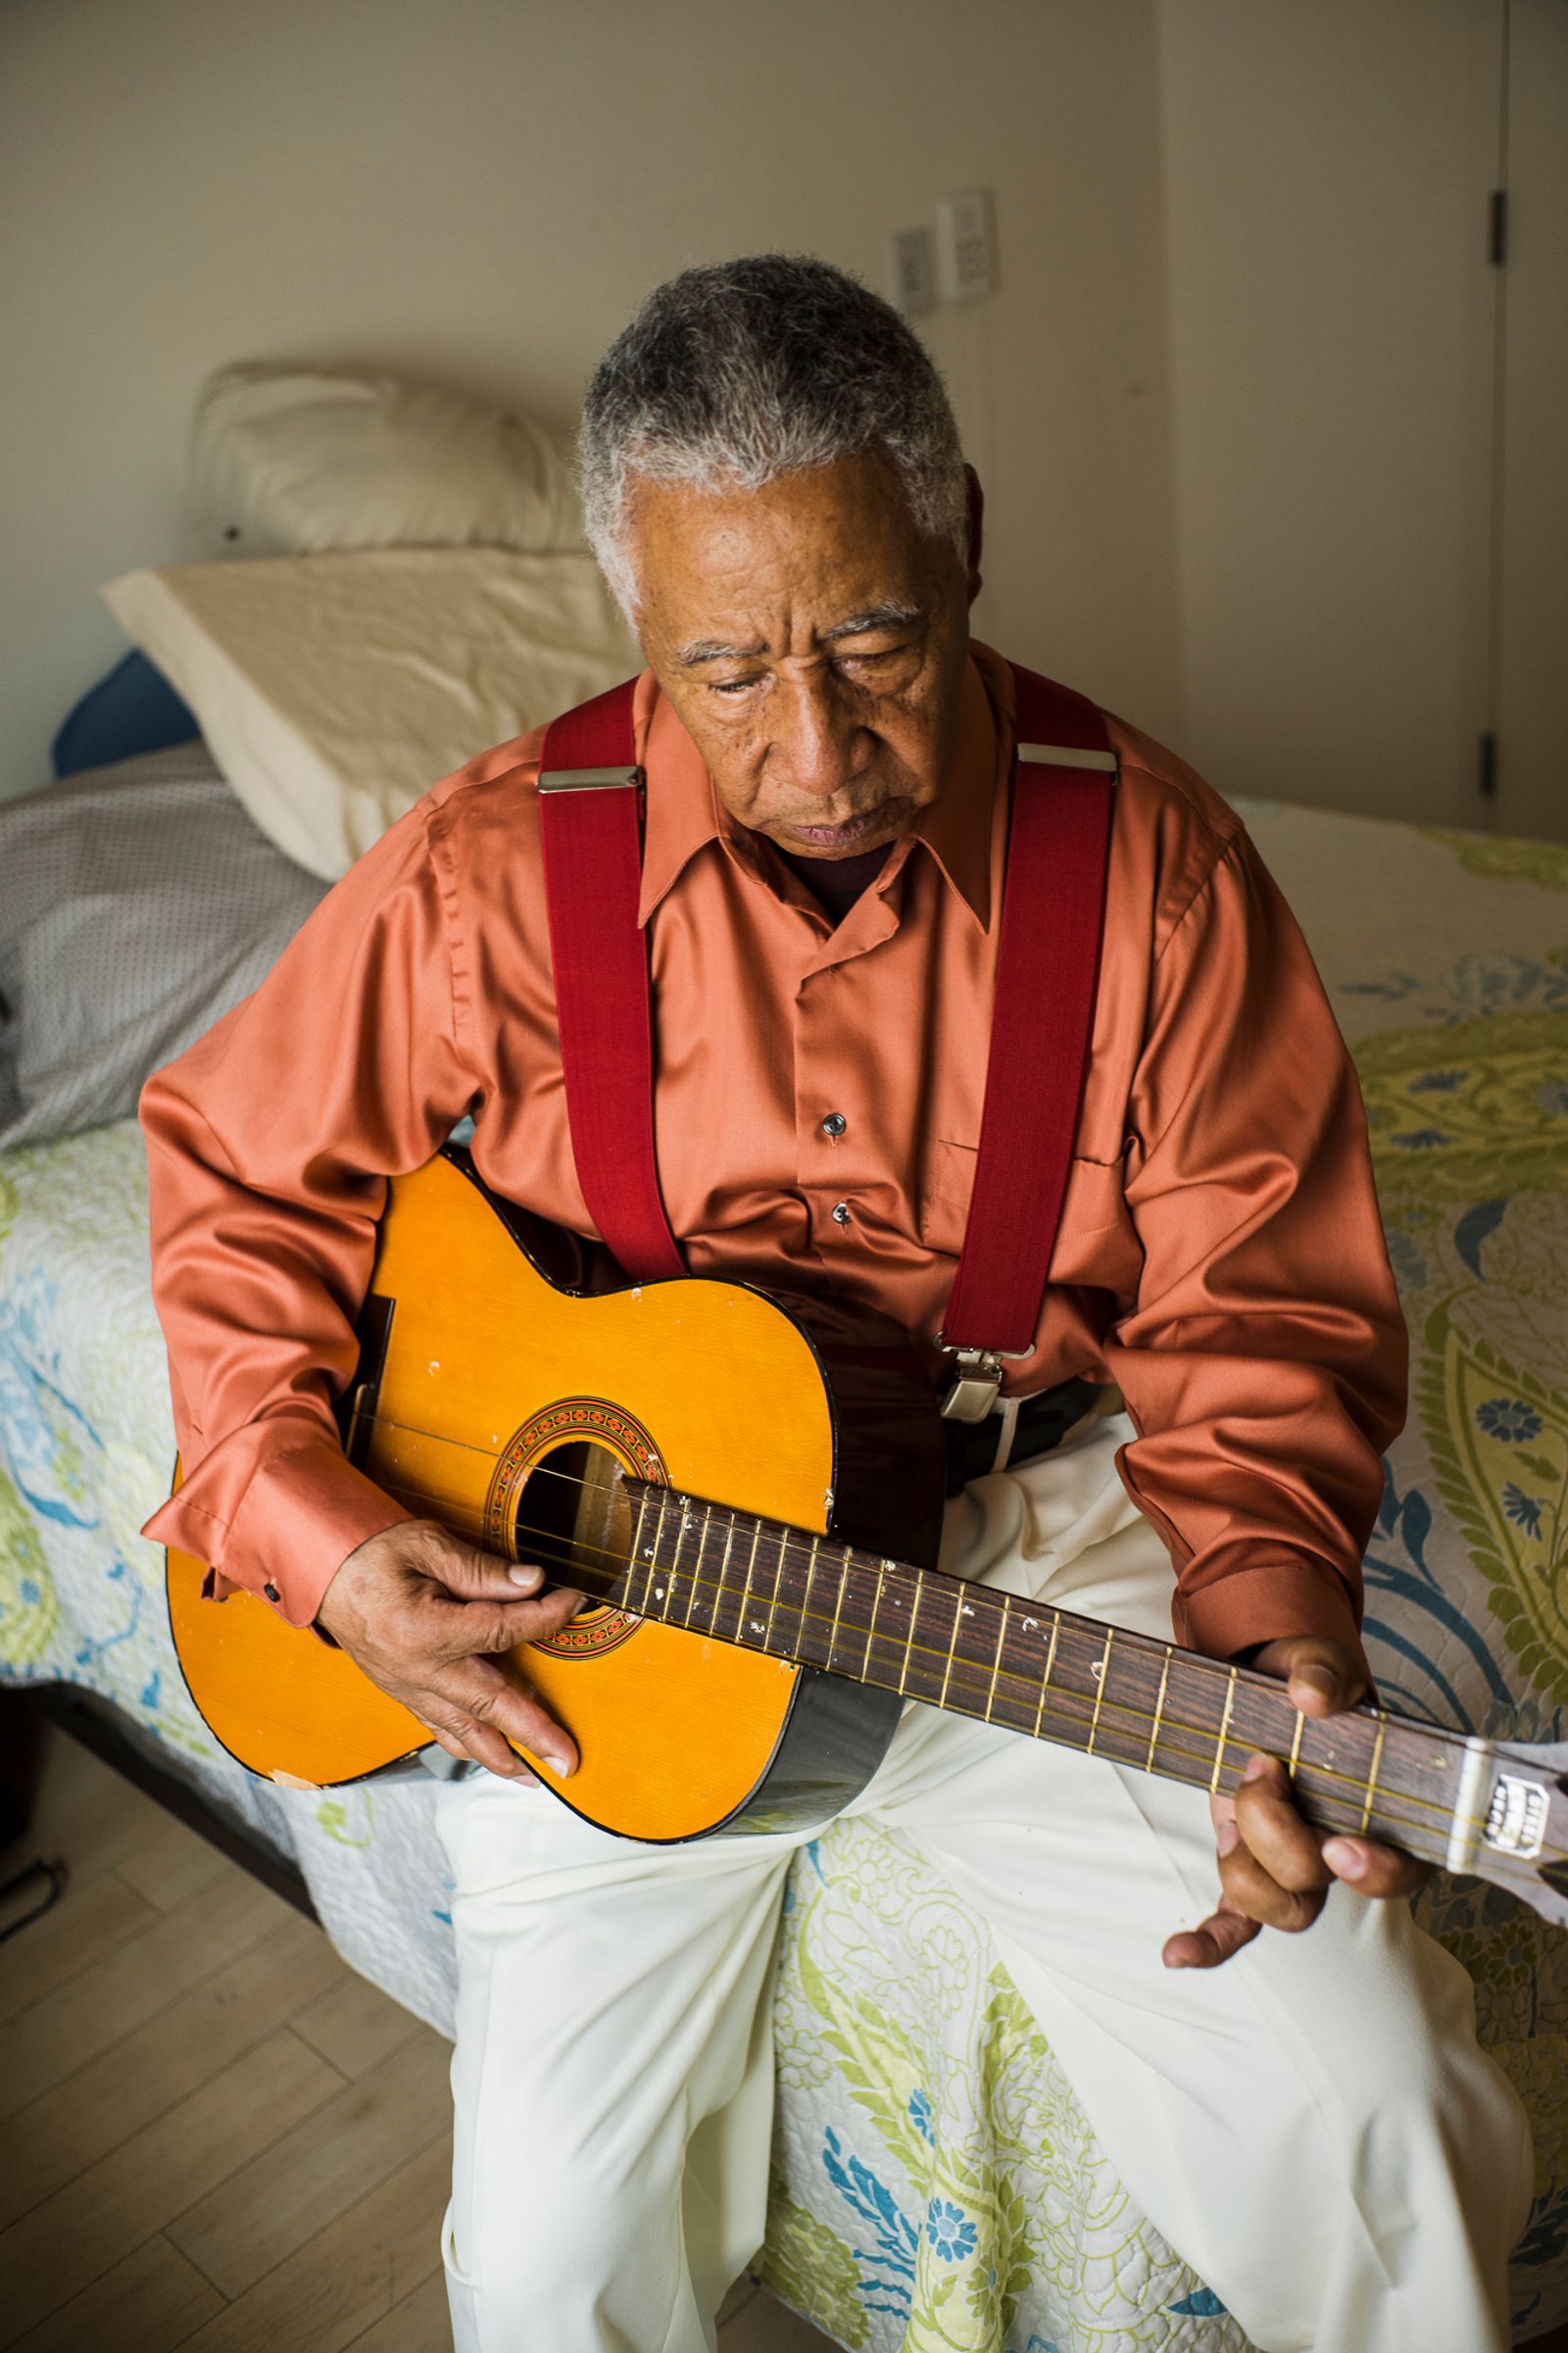 © Jaime Permuth - Strumming a guitar and singing old Ecuadorian songs helps alleviate the pain of solitude.